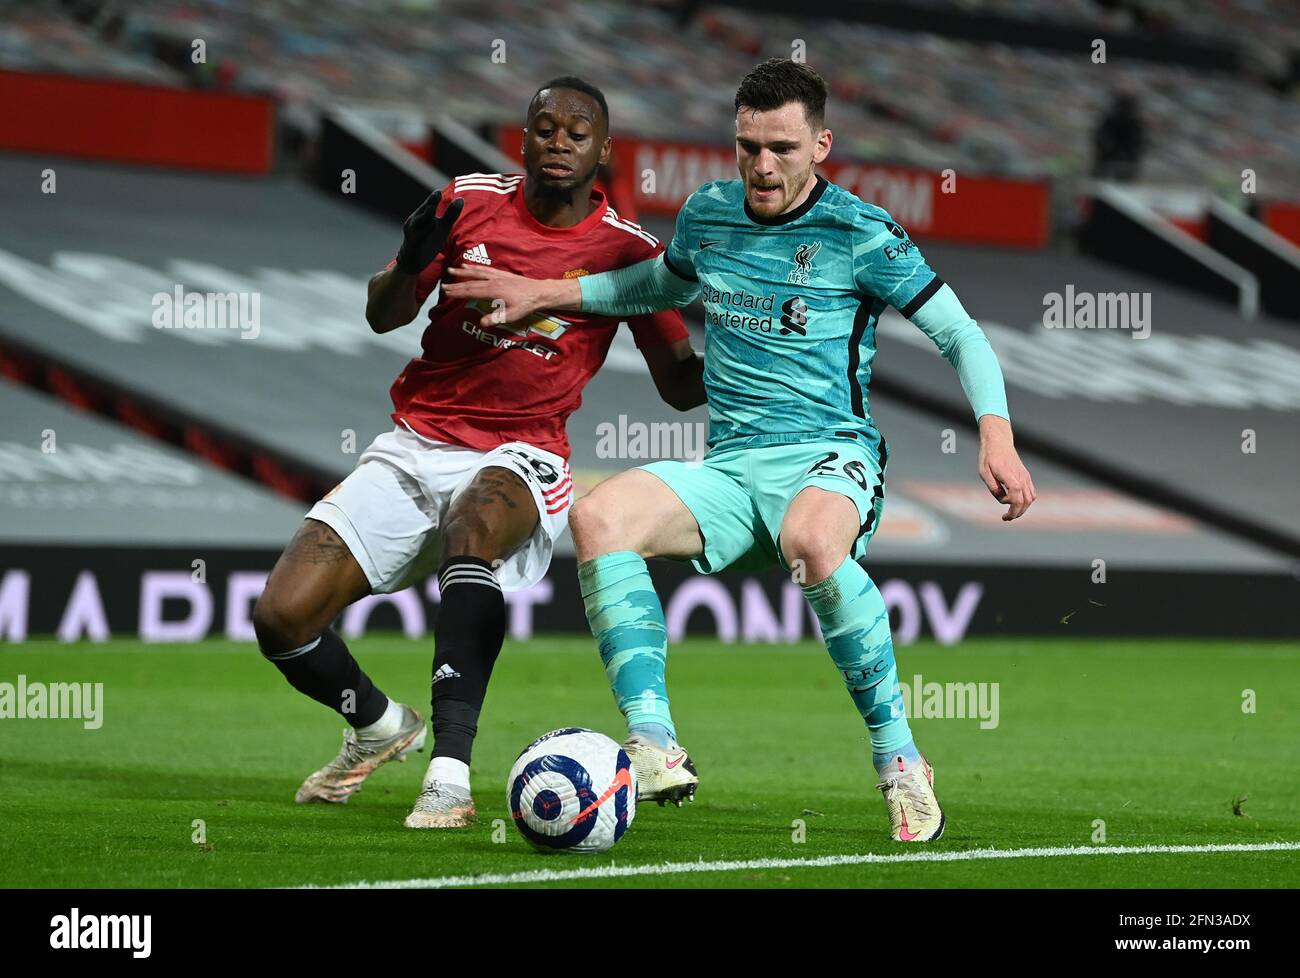 Manchester United's Aaron Wan-Bissaka (left) and Liverpool's Andrew Robertson battle for the ball during the Premier League match at Old Trafford, Manchester. Picture date: Thursday May 13, 2021. Stock Photo